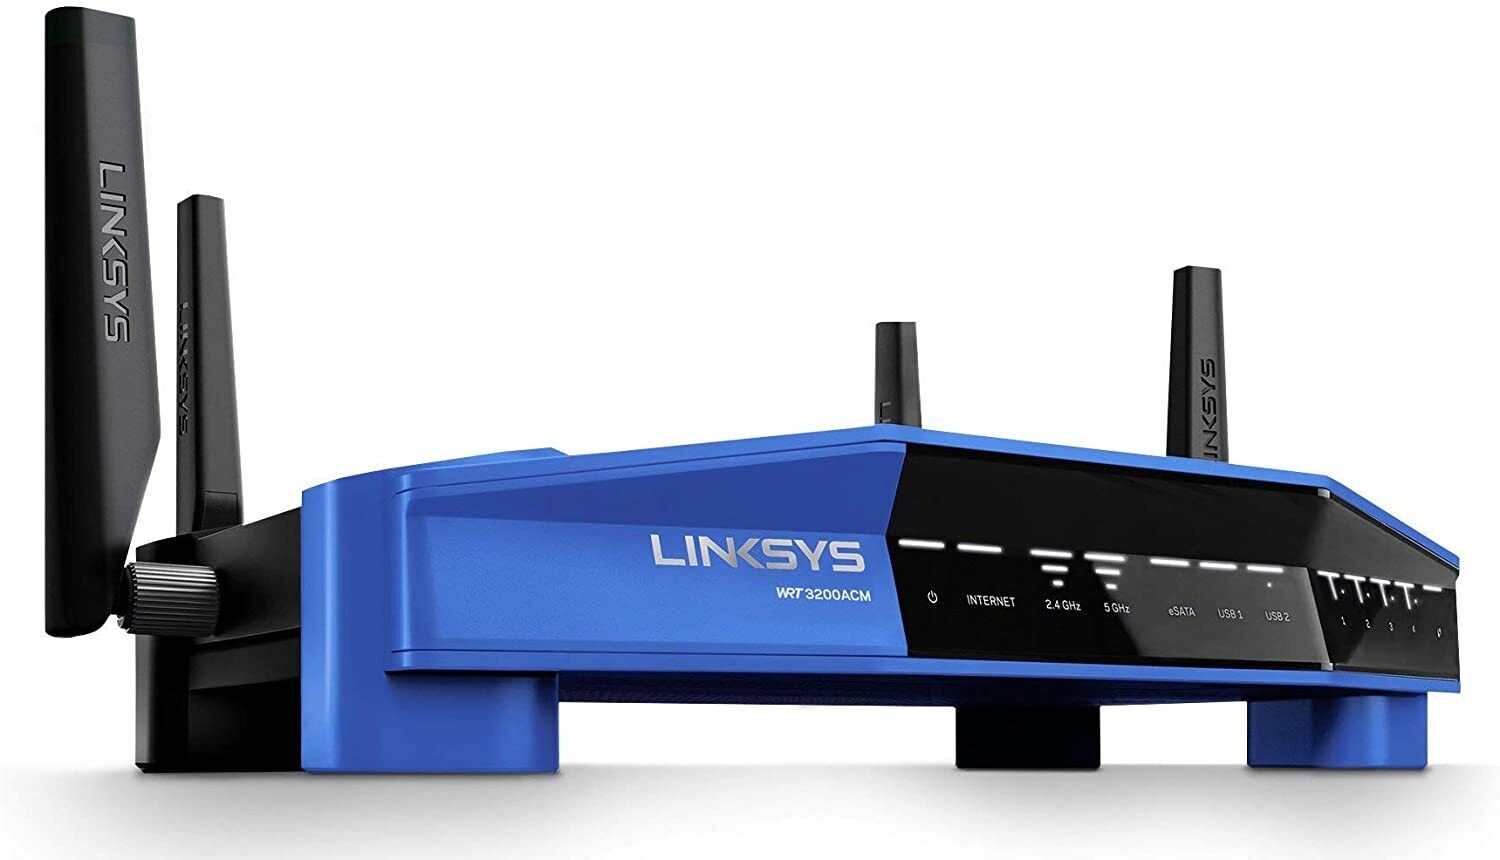 New Linksys WRT3200ACM AC3200 MU-MIMO Router Open Source Rdy Built for Gamers